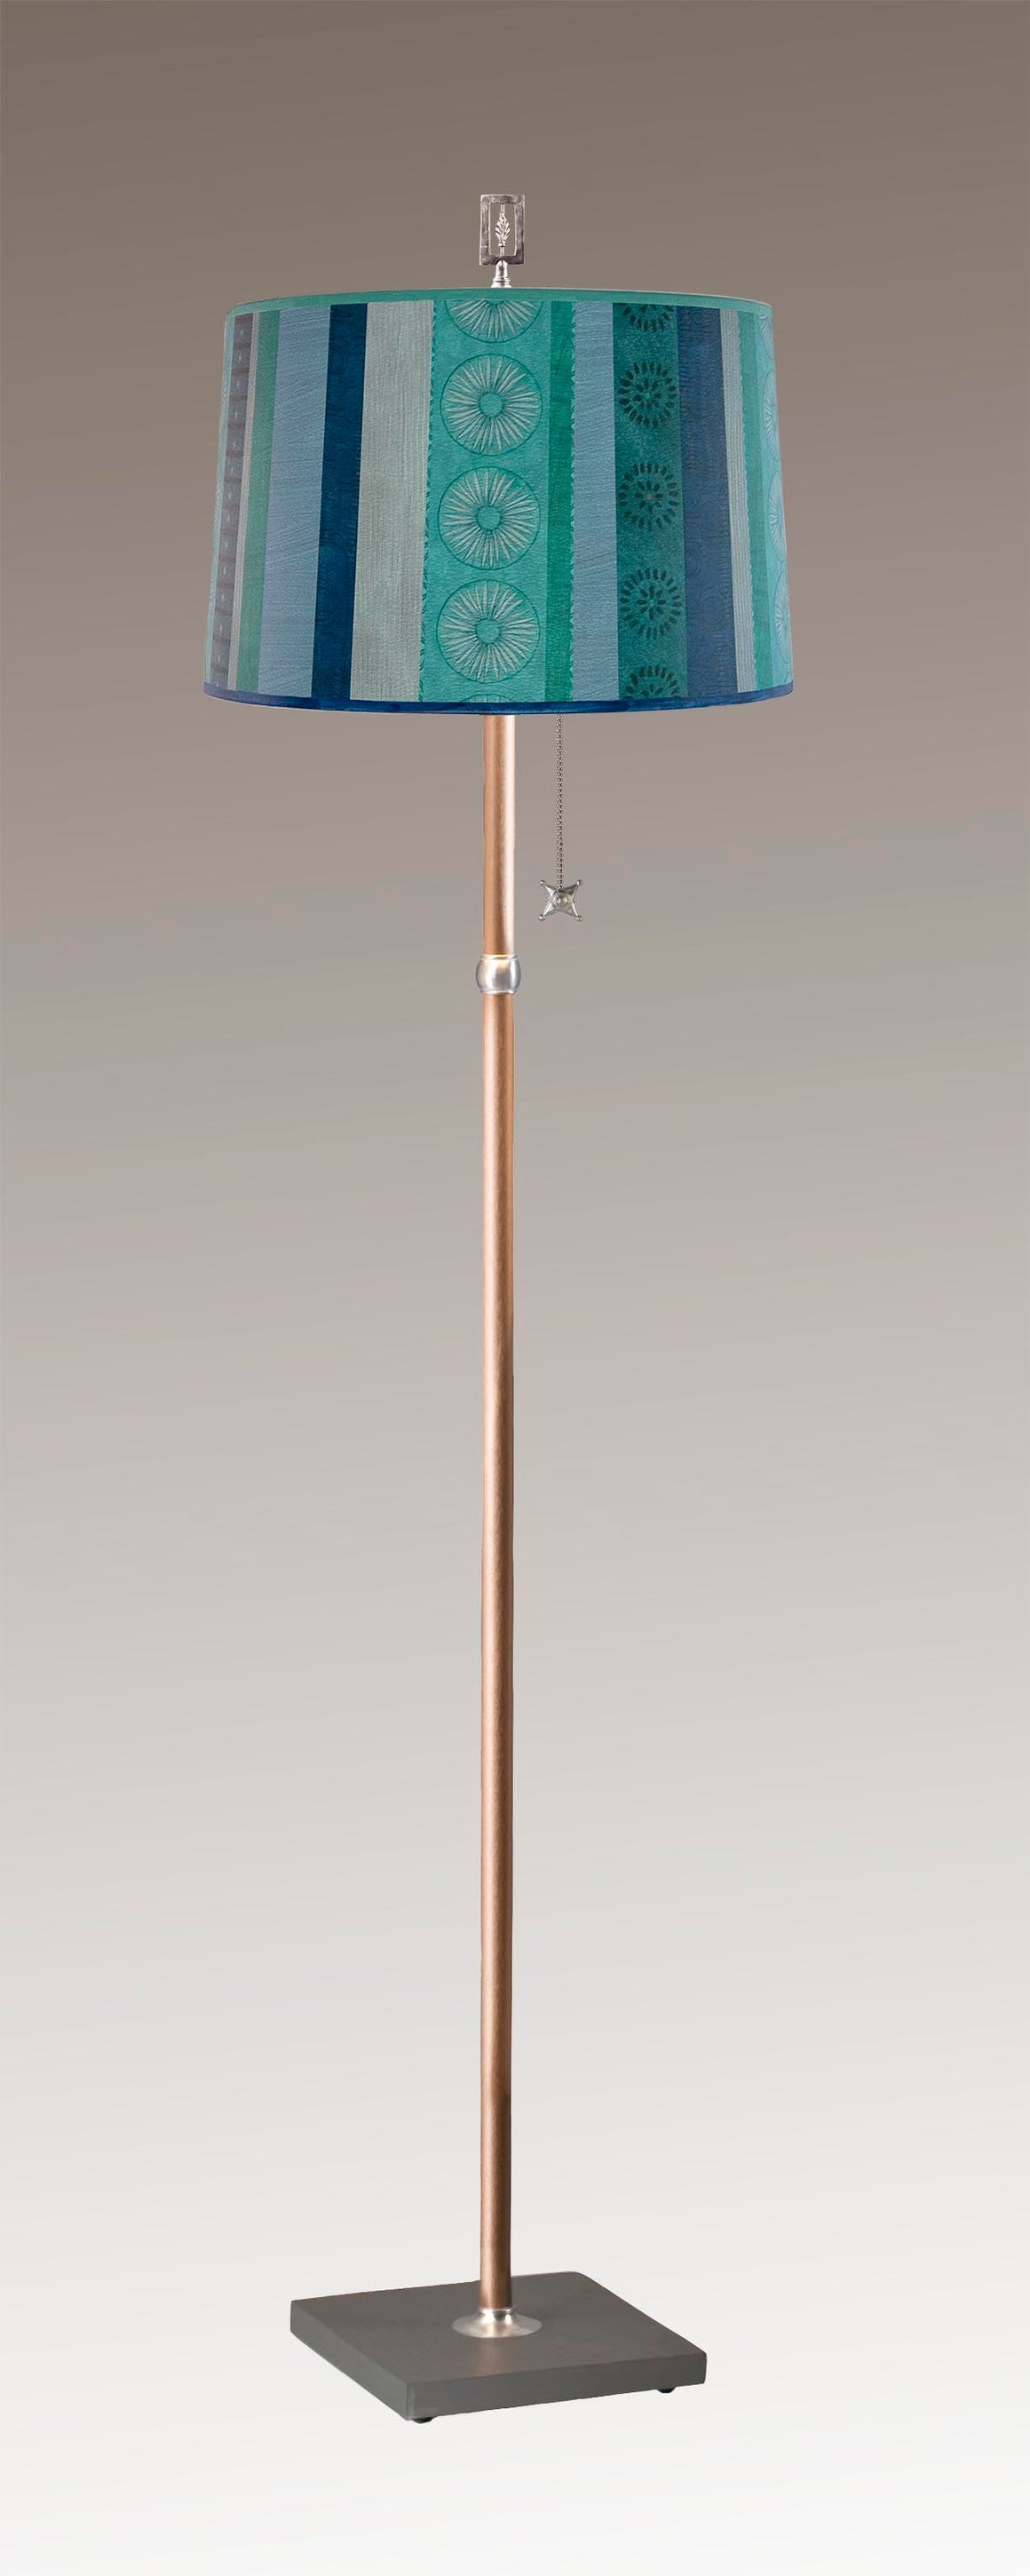 Copper Floor Lamp with Large Drum Shade in Serape Waters